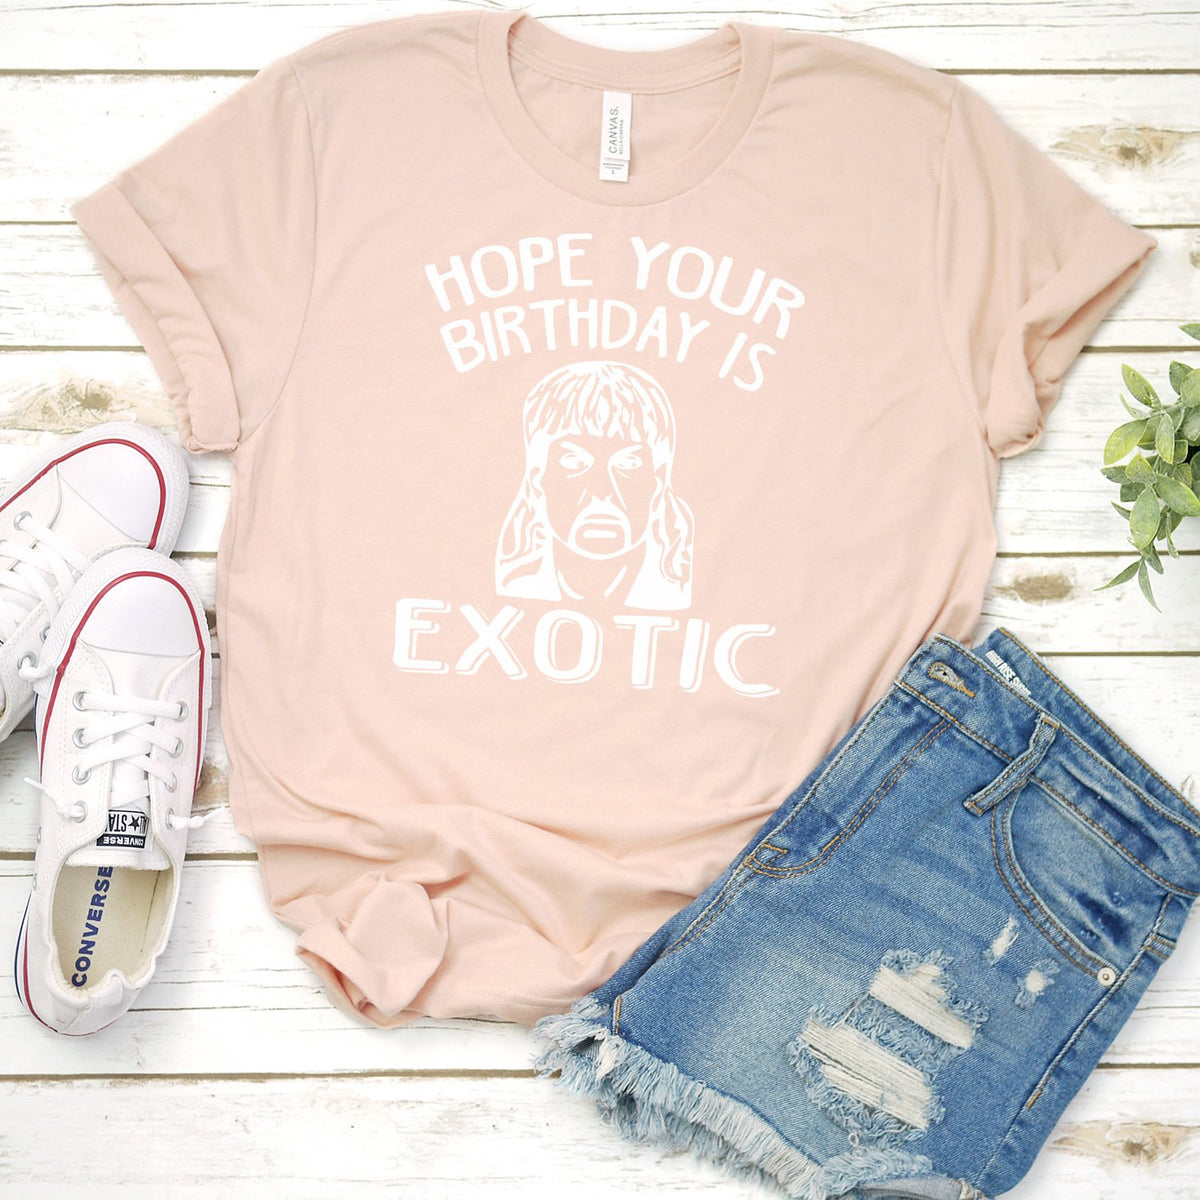 Hope Your Birthday is Exotic - Short Sleeve Tee Shirt